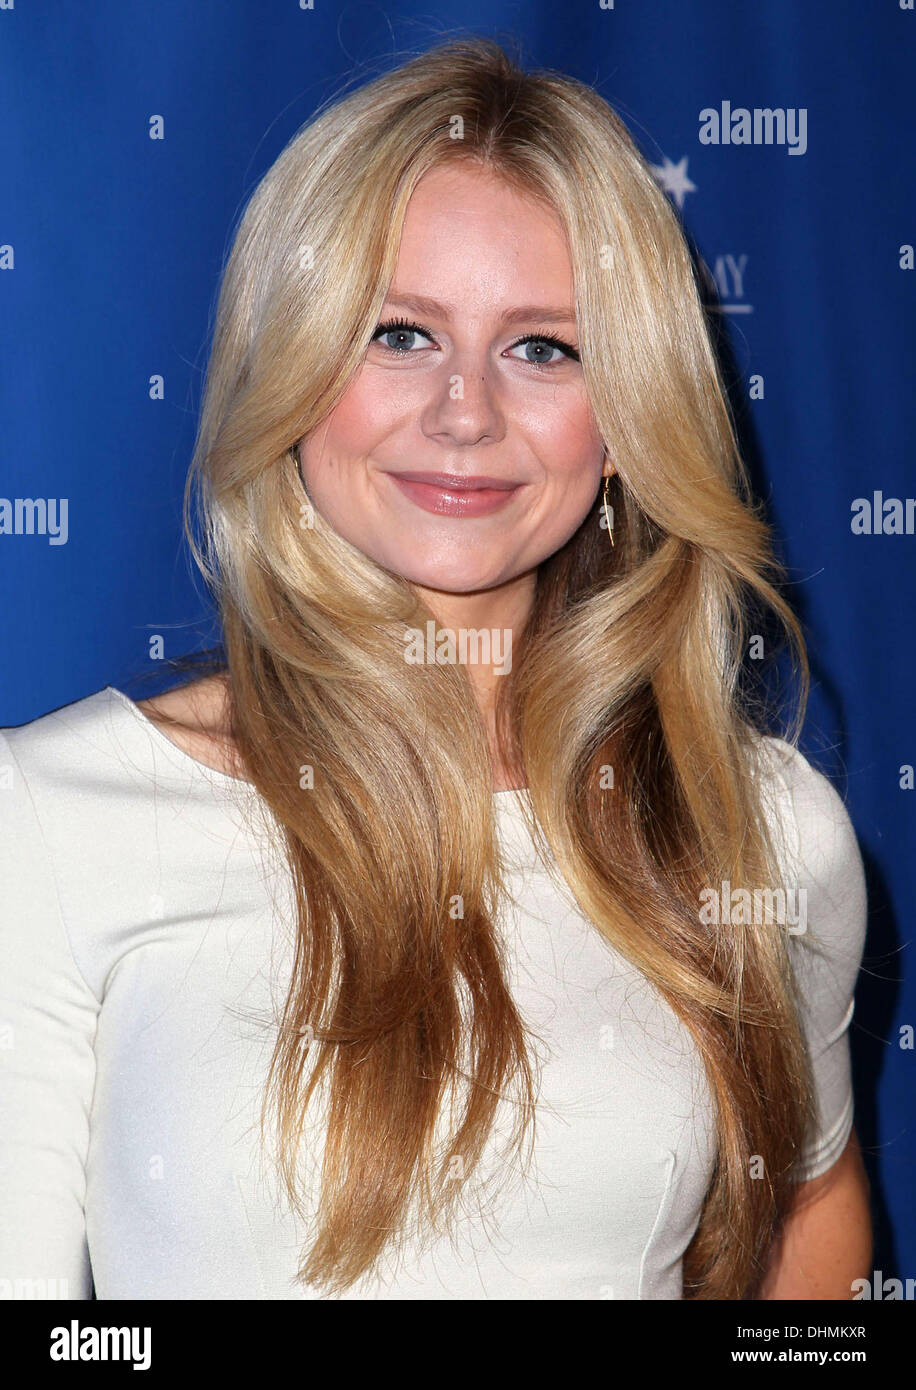 25+ Amazing Pictures of Justine Lupe - Swanty Gallery